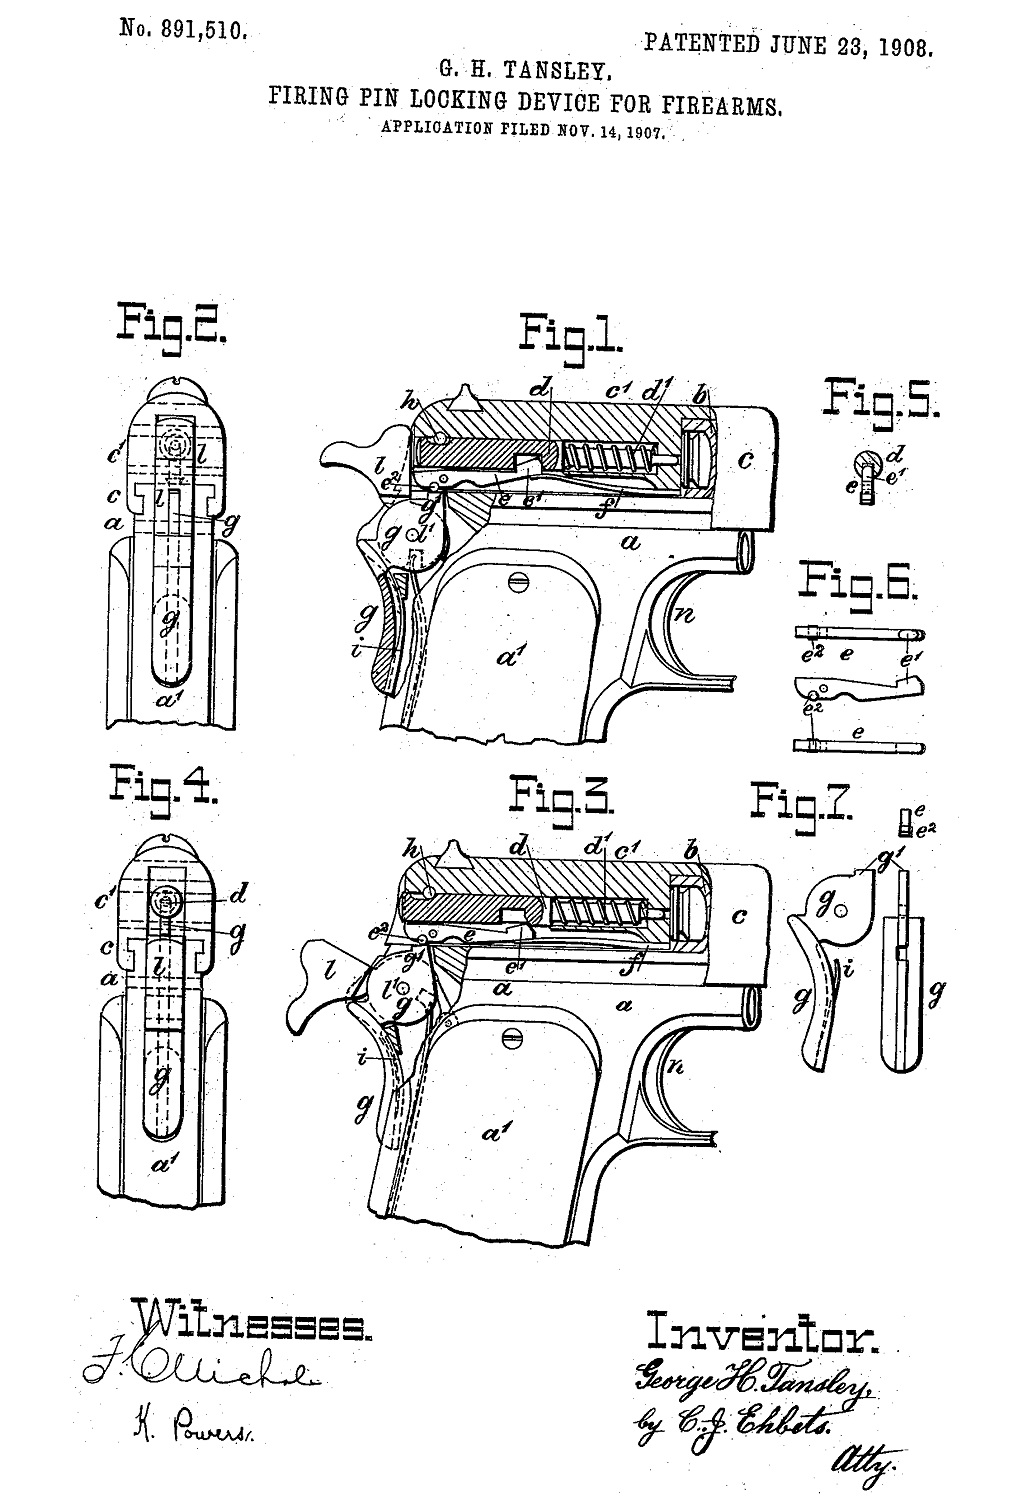 Colt Model 1907 patent George Tansley